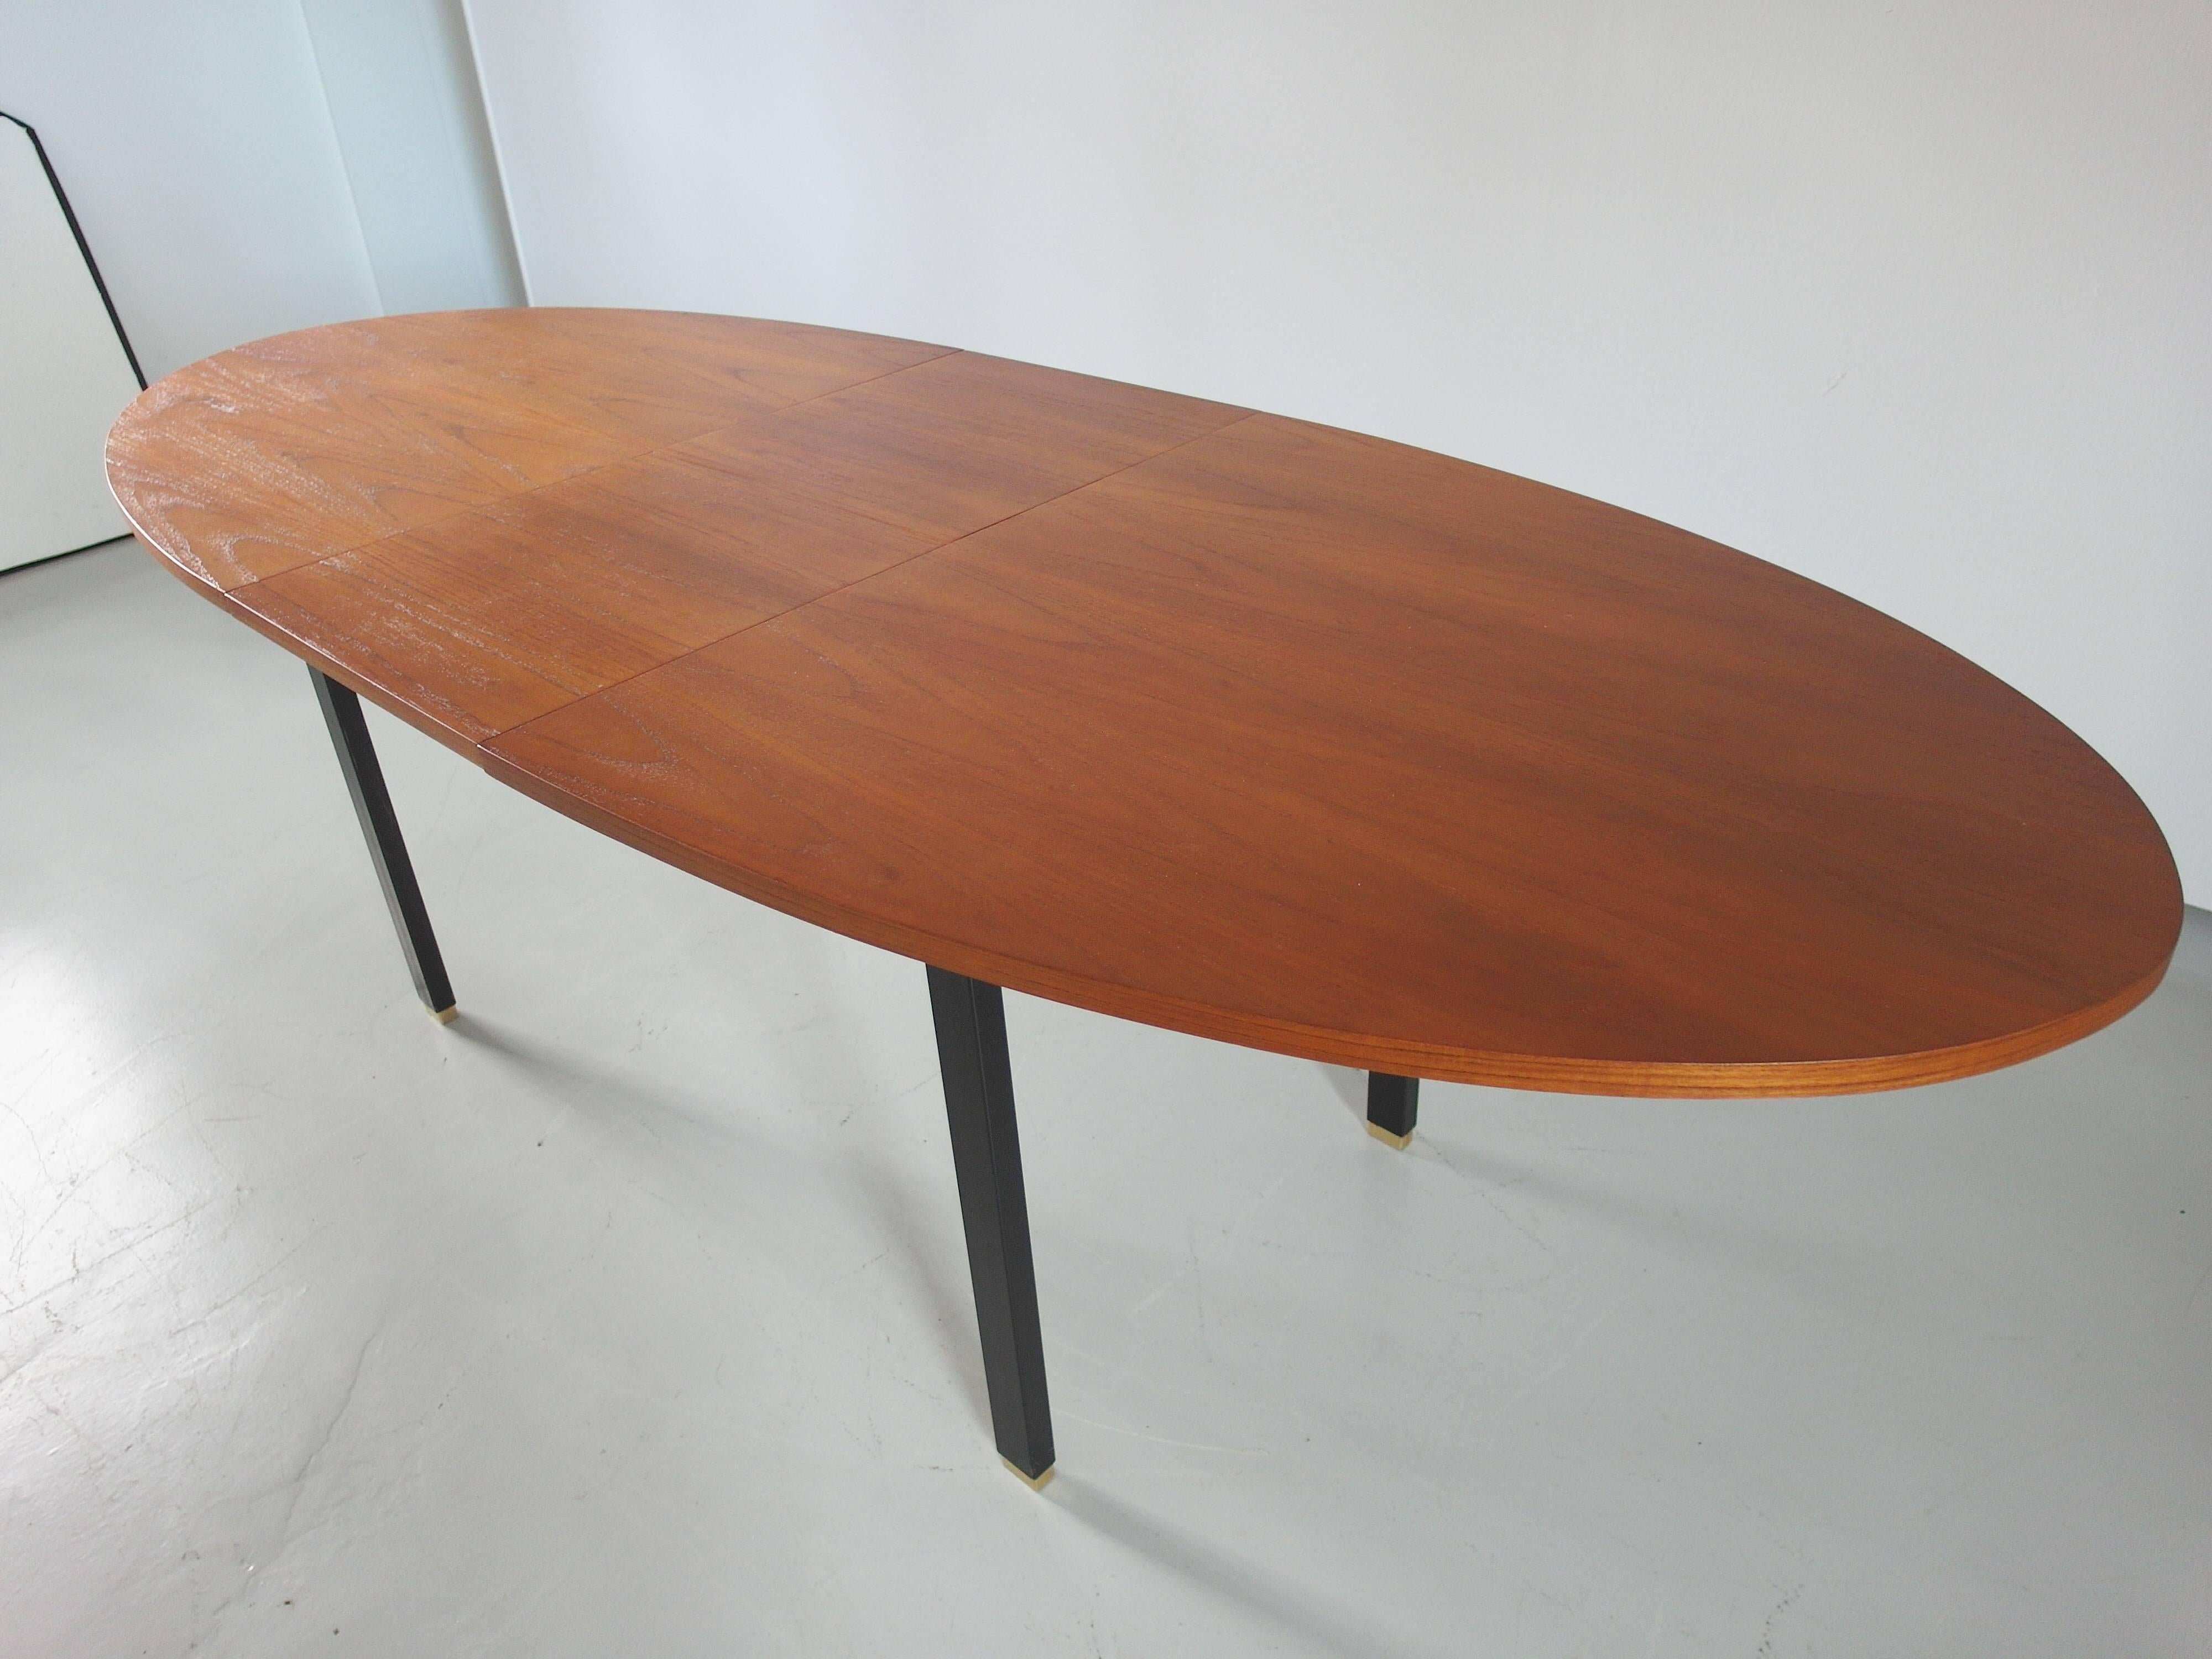 Mid-20th Century Extendable Oval Dining Table with Teak Top and Brass Feet, Belgium, 1960s